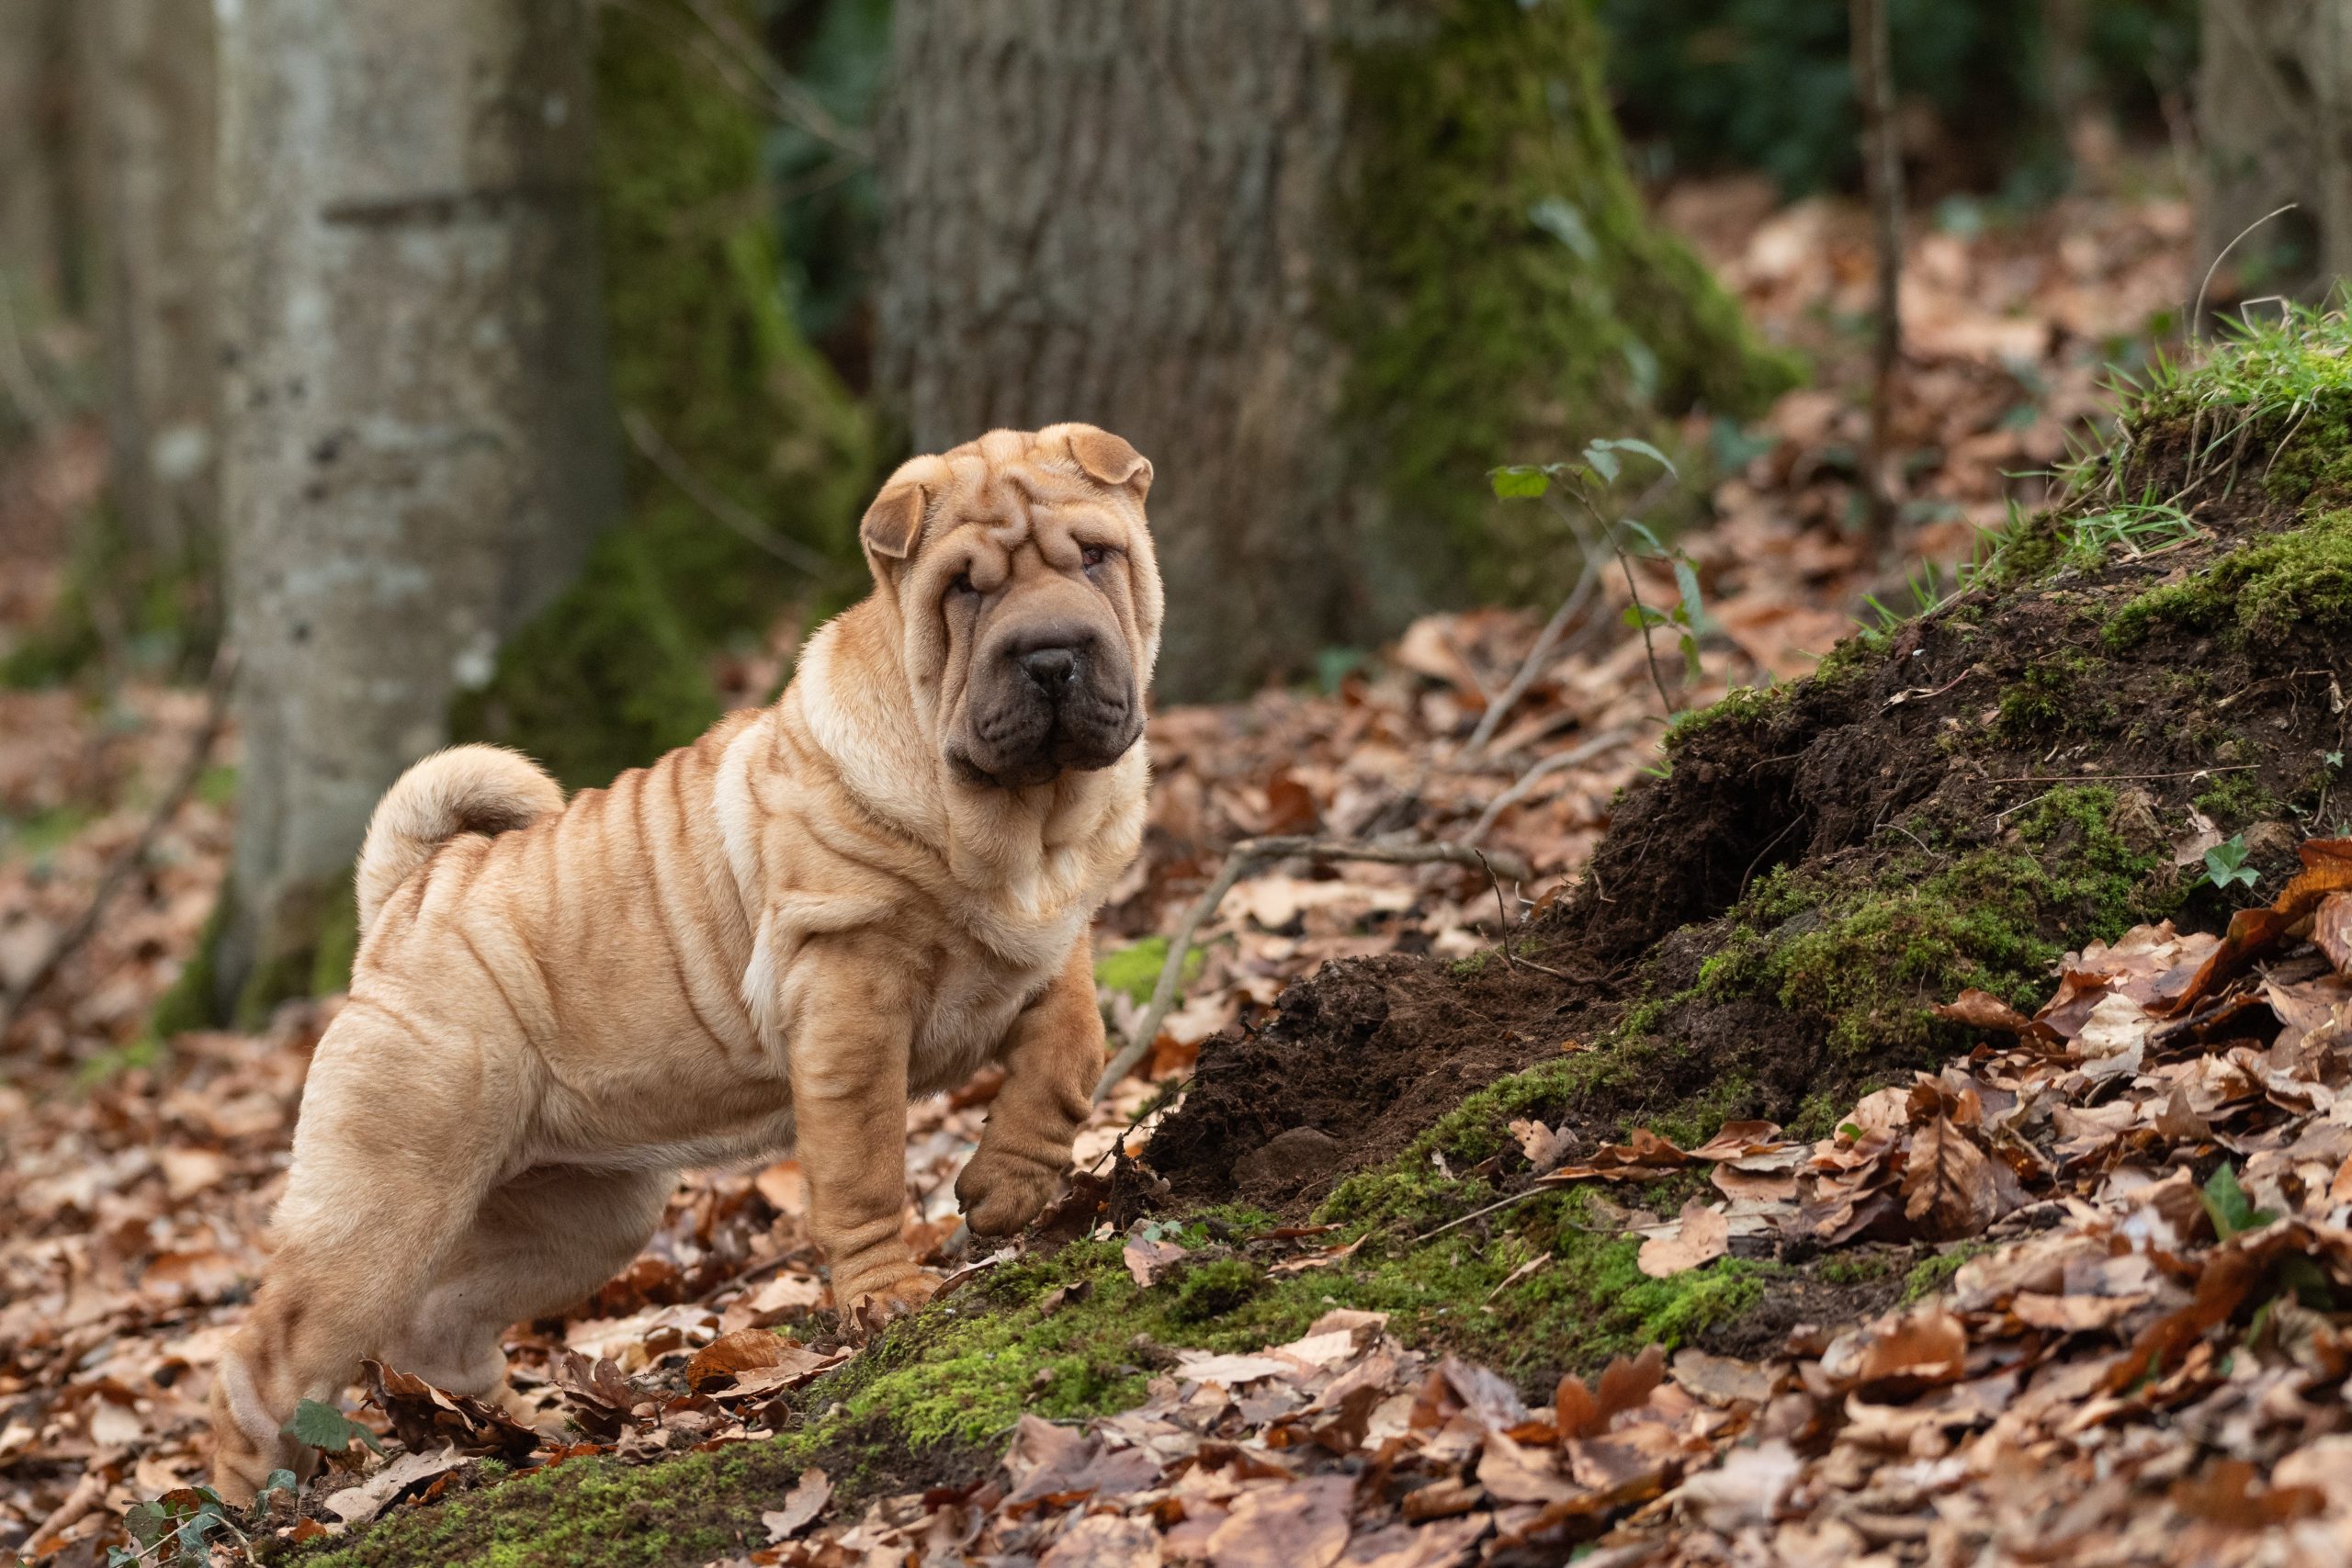 Monthly Cost to Own a Shar Pei